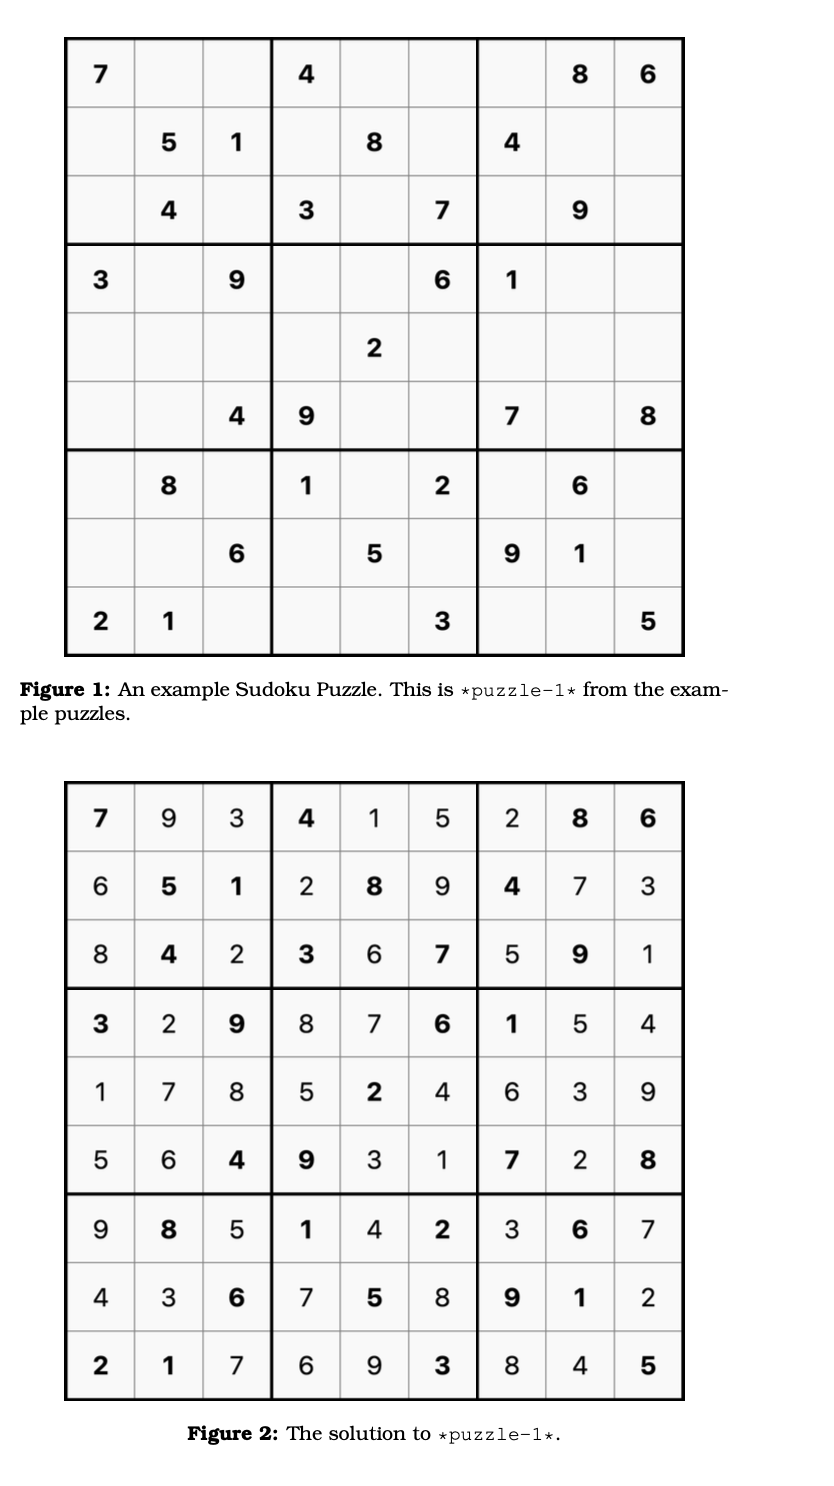 Example of an order-3 Sudoku puzzle. This particular grid is